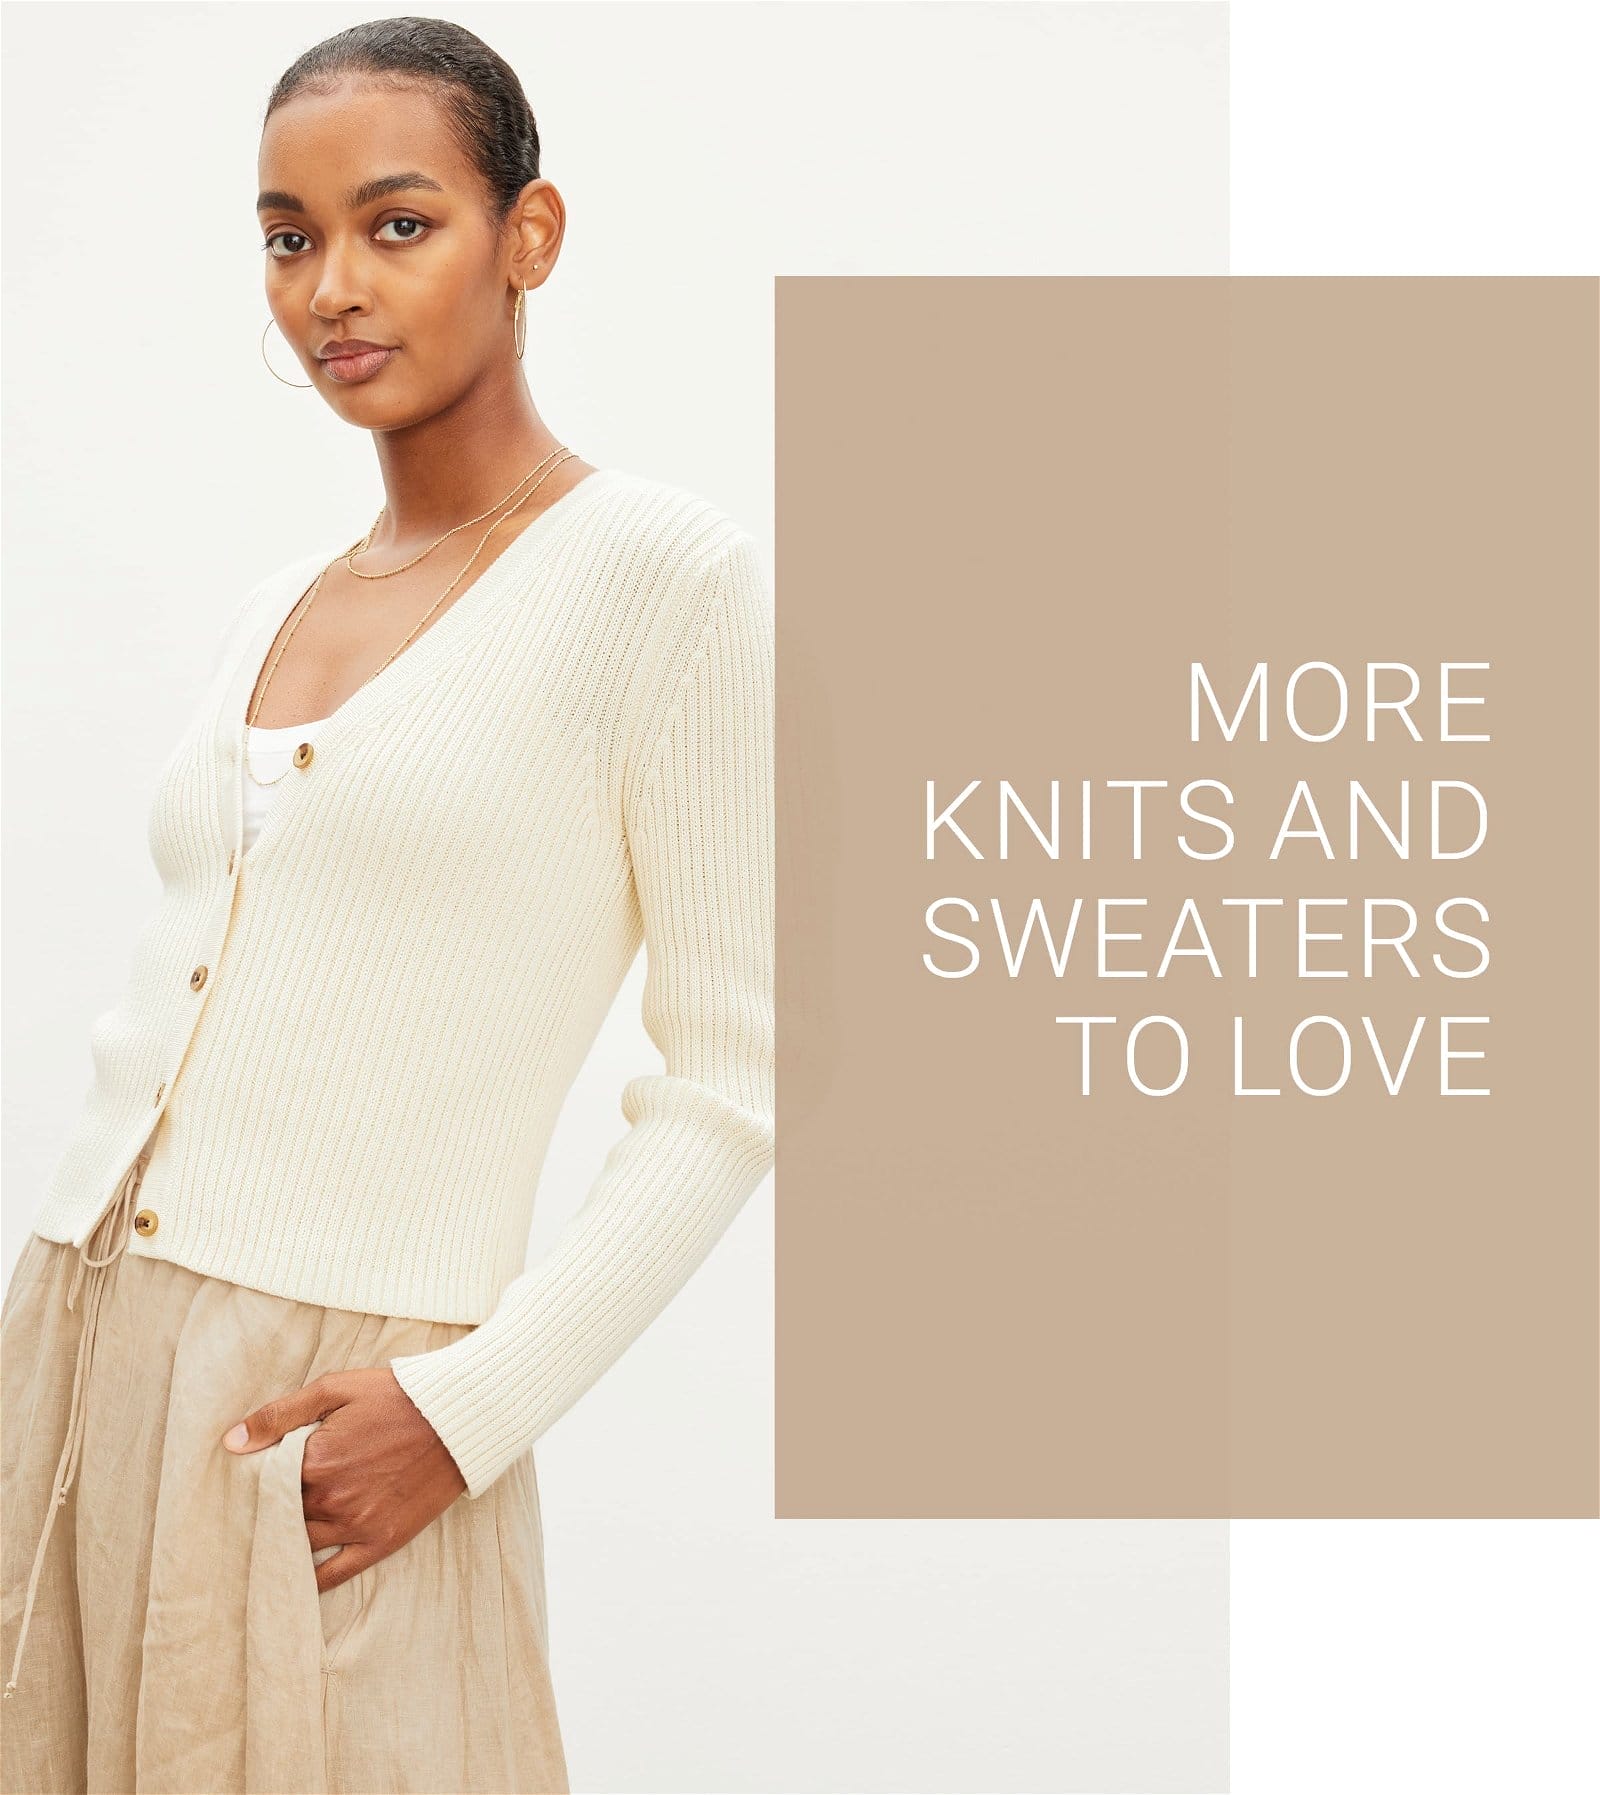 MORE KNITS AND SWEATERS TO LOVE